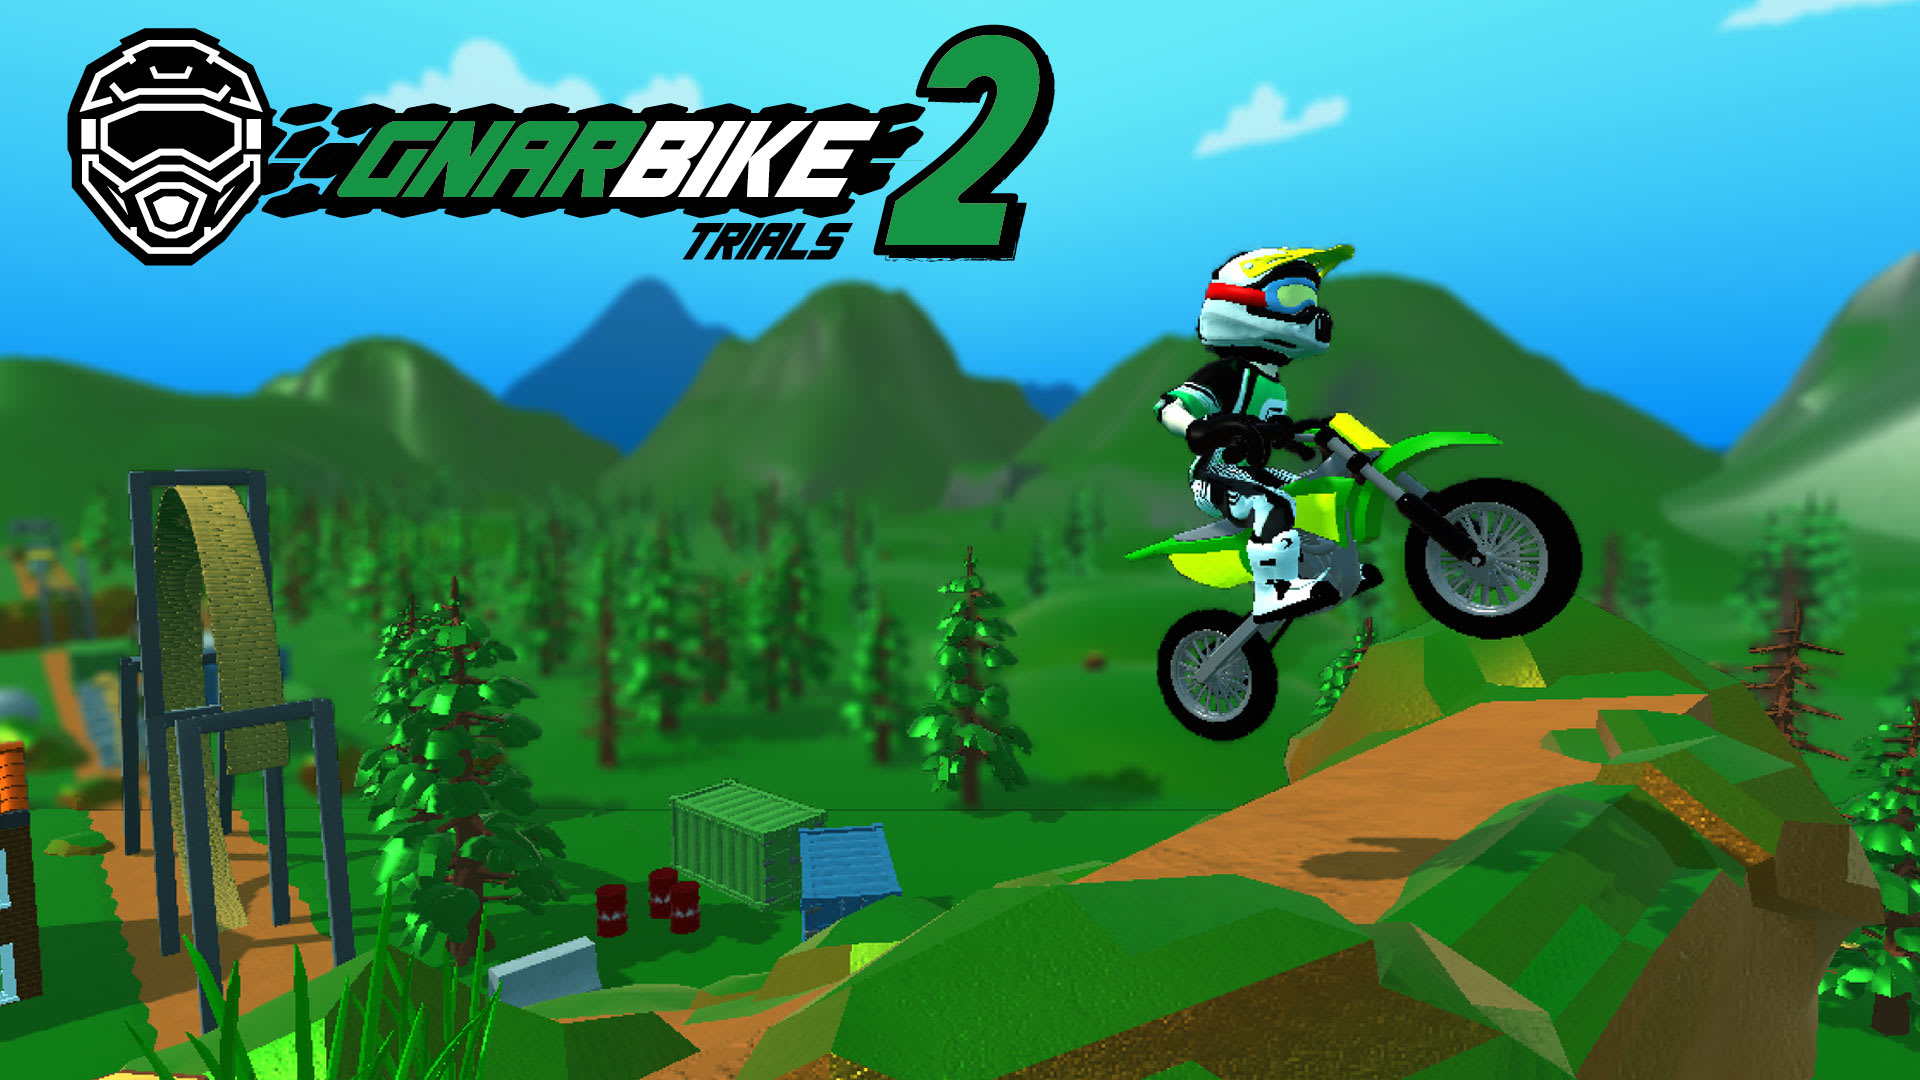 Gnarbike Trials 2  1